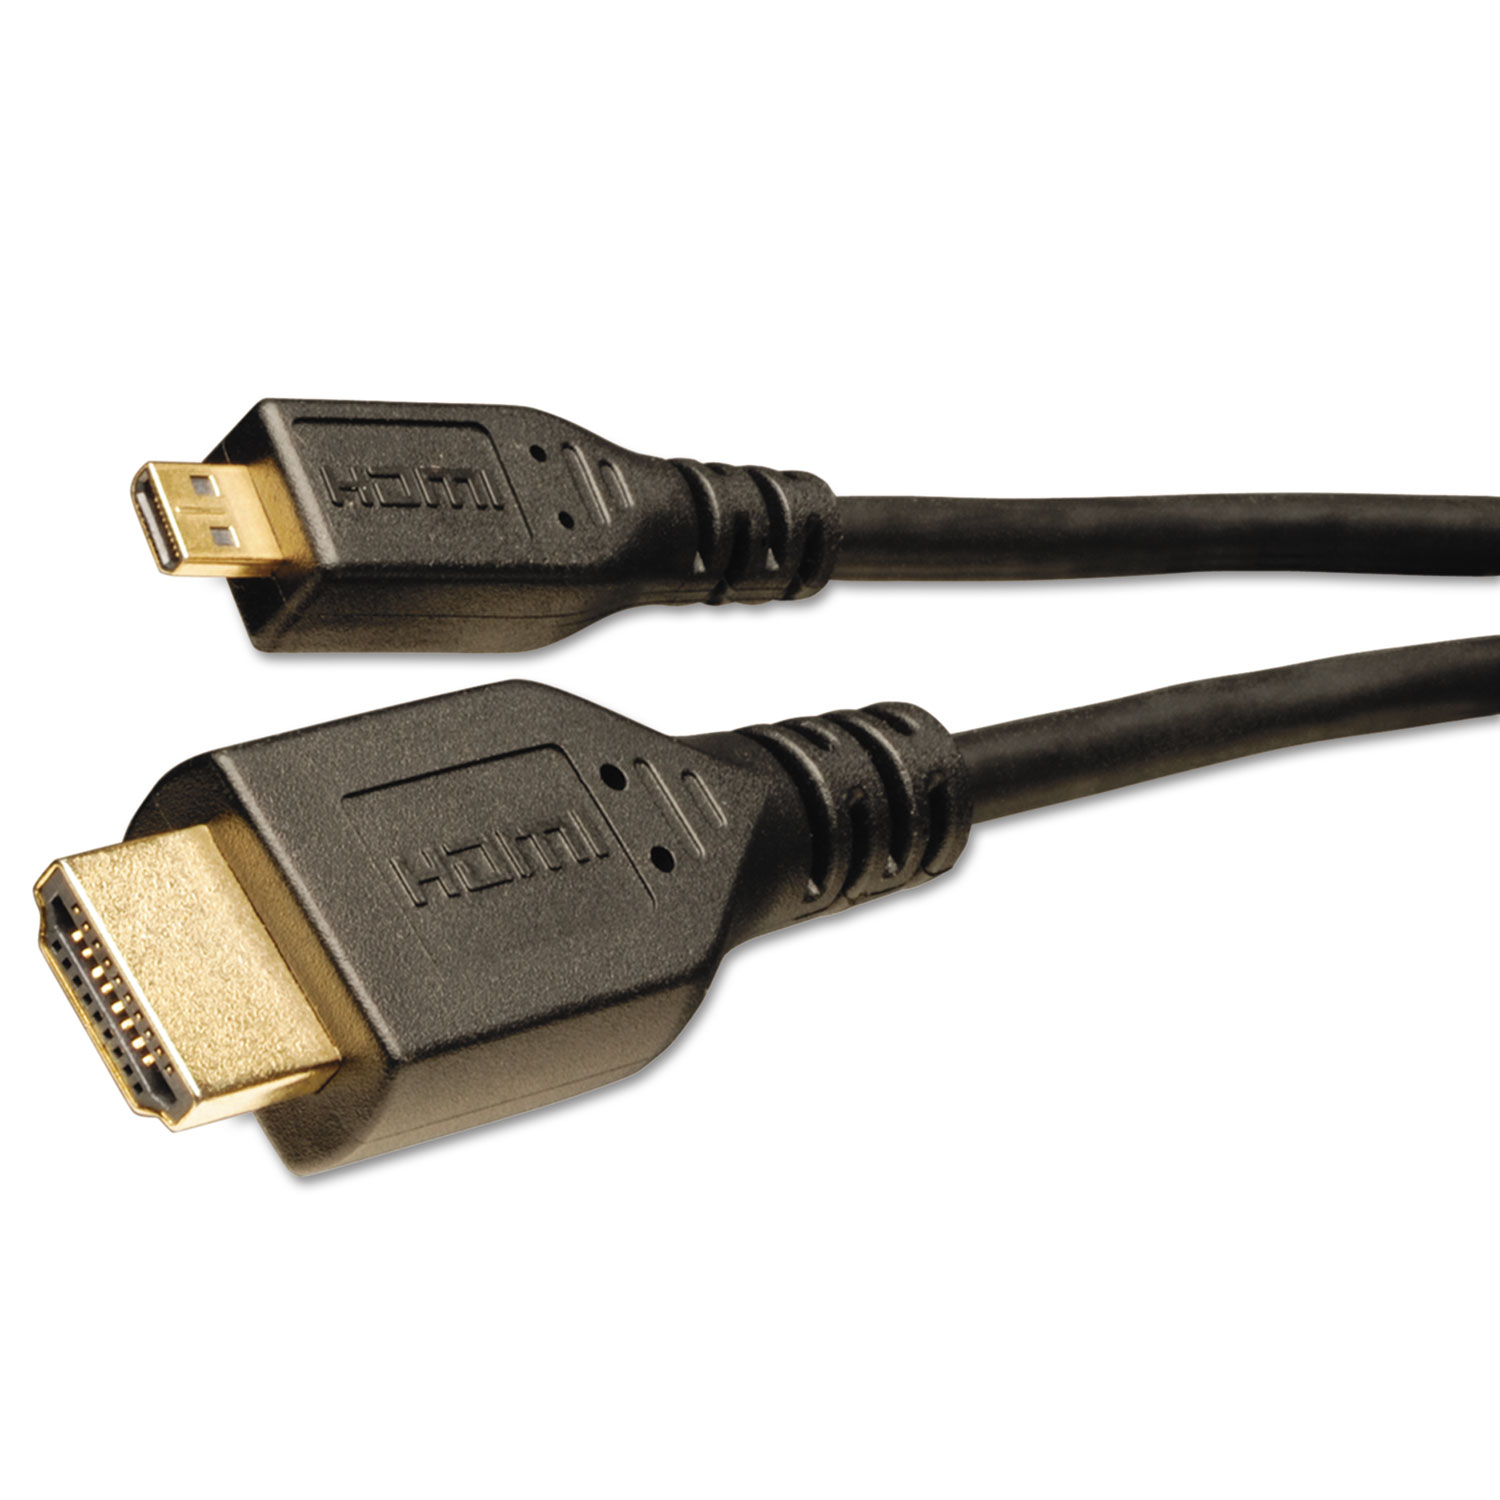 HDMI to Micro HDMI Cable with Ethernet, Digital Video with Audio Adapter, 6 ft